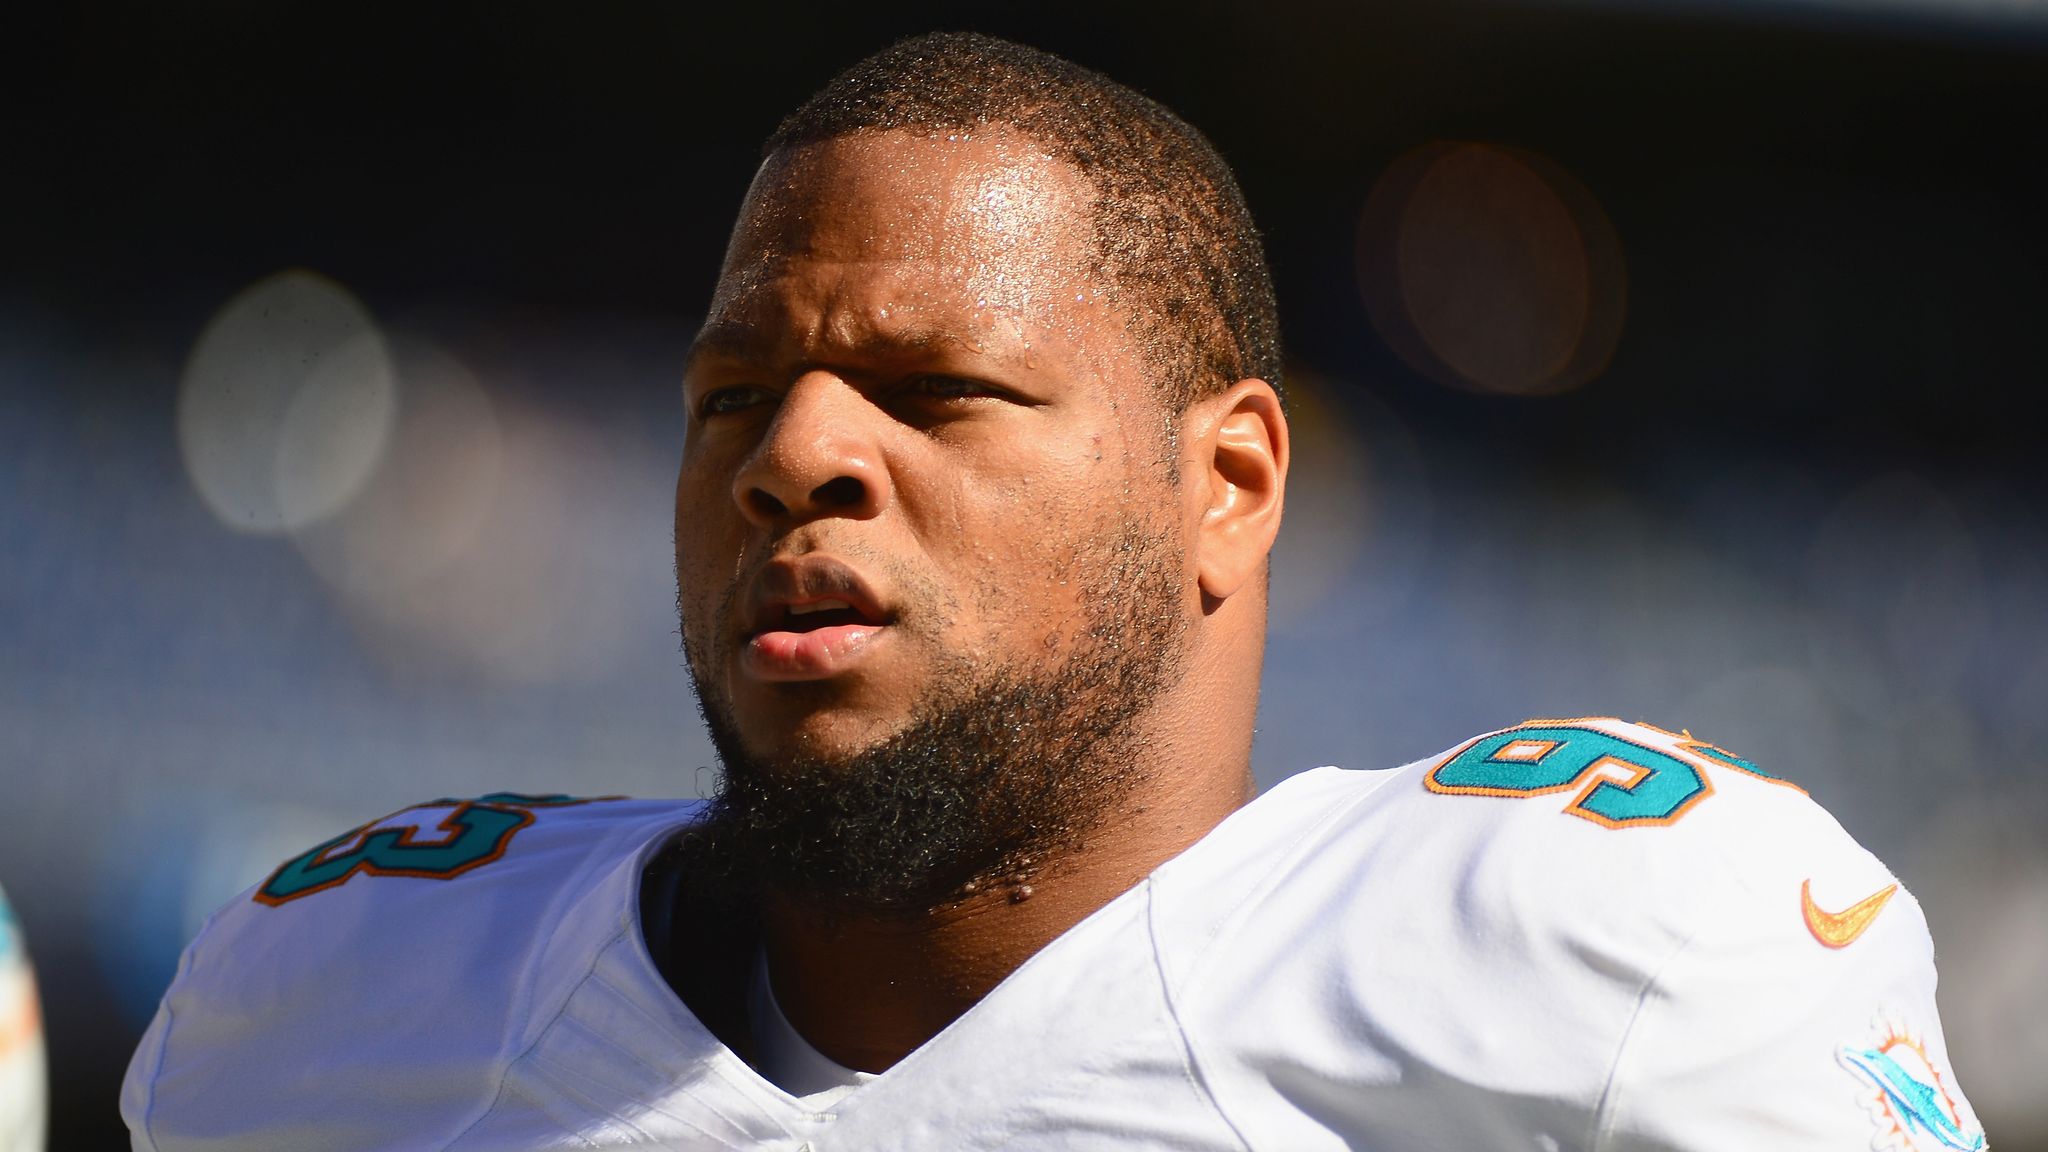 Free agent DT Ndamukong Suh cancels visit to Oakland Raiders, NFL News